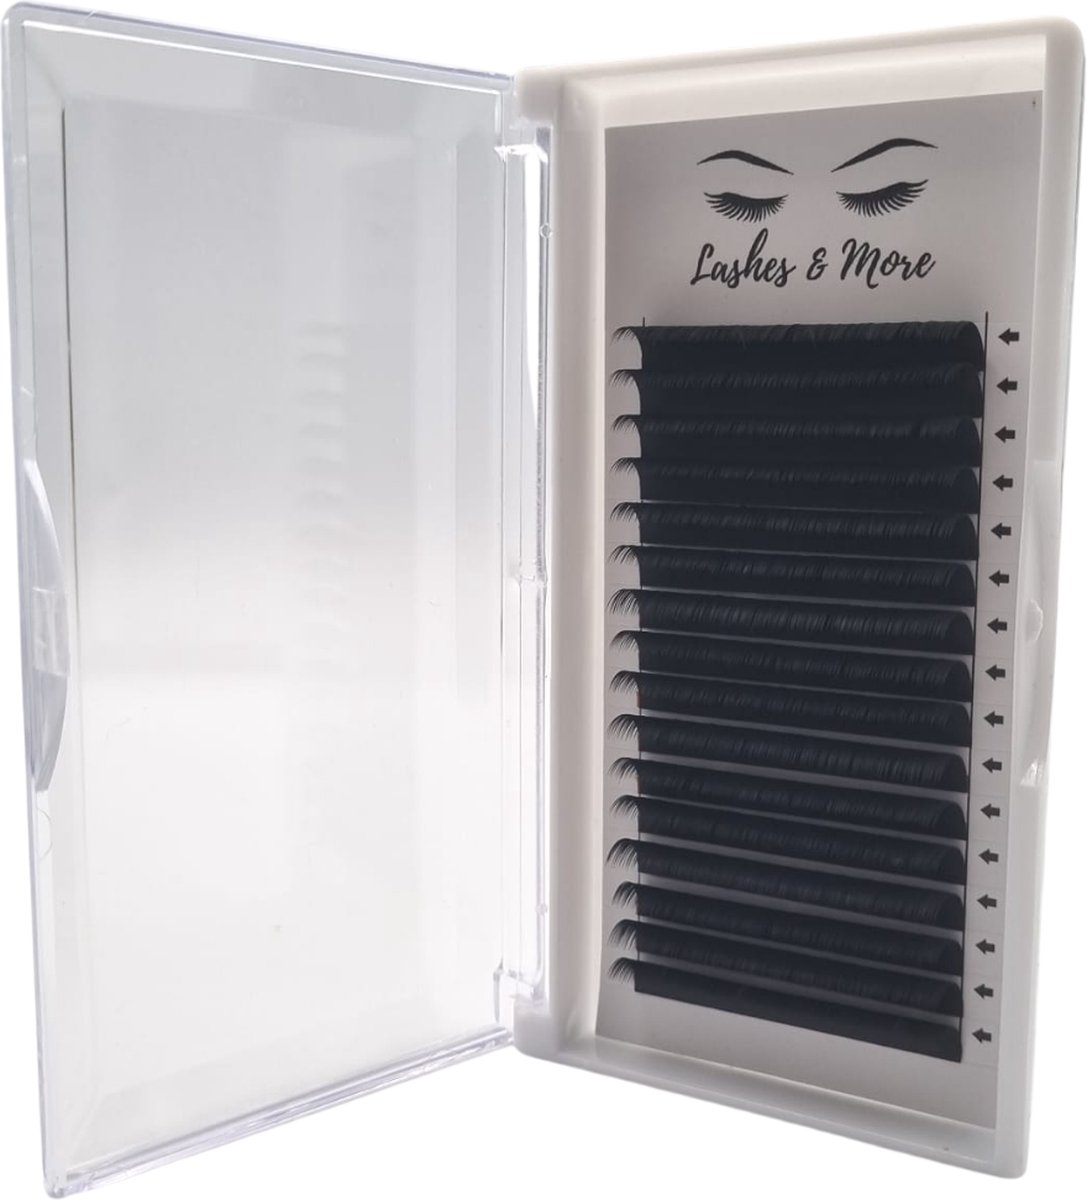 Lashes & More wimperextensions - One By One - D Krul – Dikte 0.20 – Lengte 8mm – 16 rijen in een tray - nepwimpers - Flat Lashes